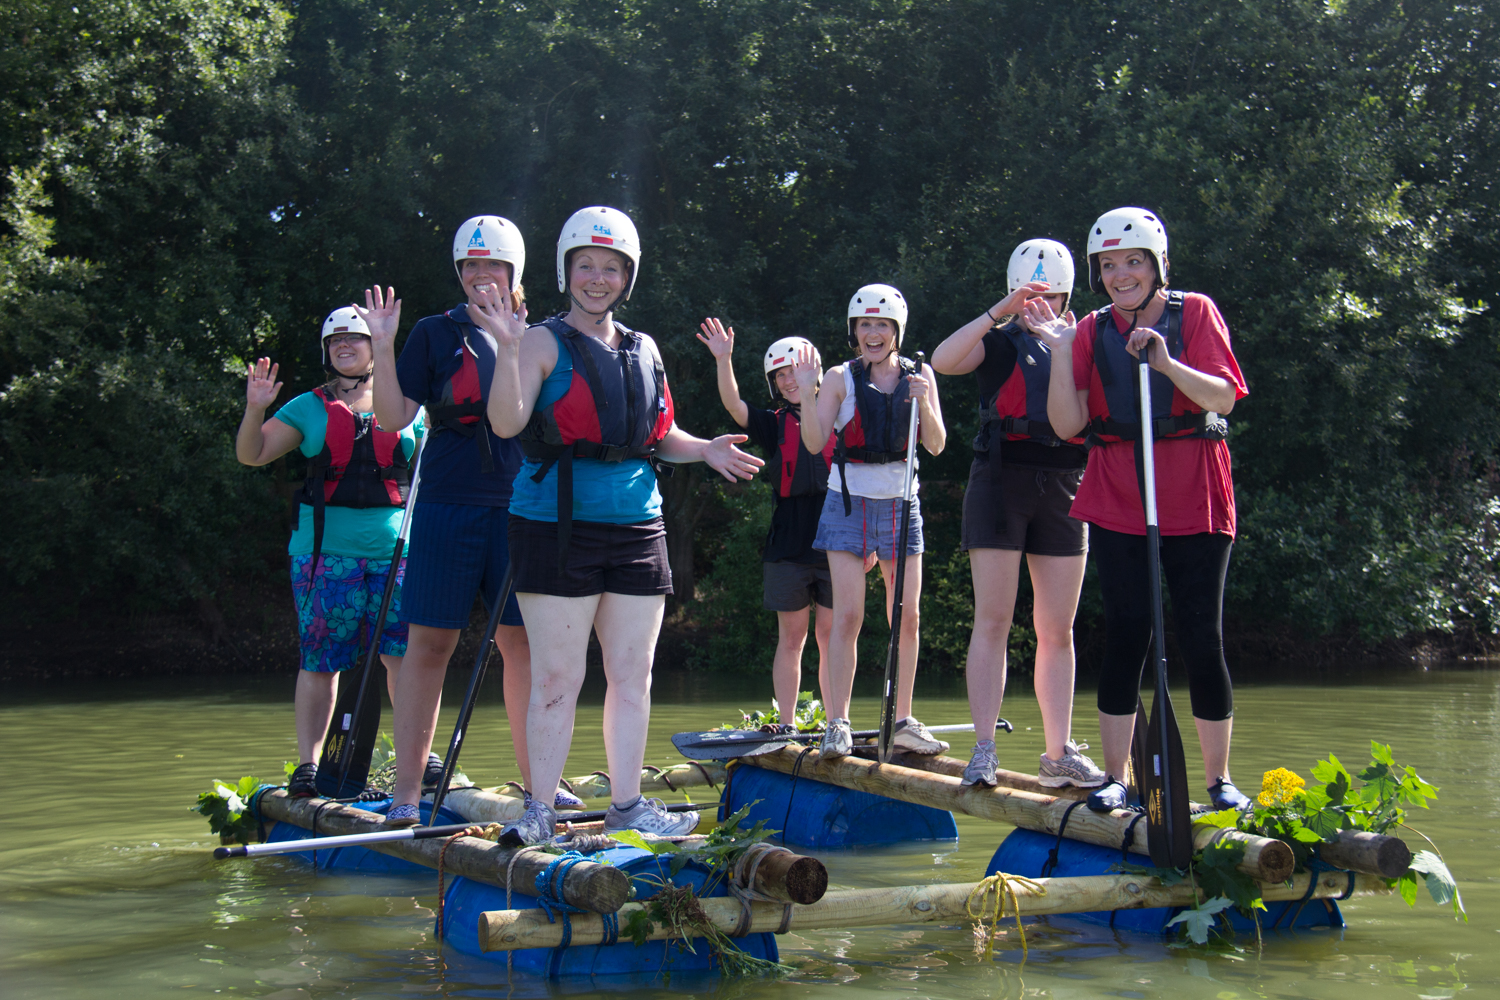 A group taking part in raft building activity